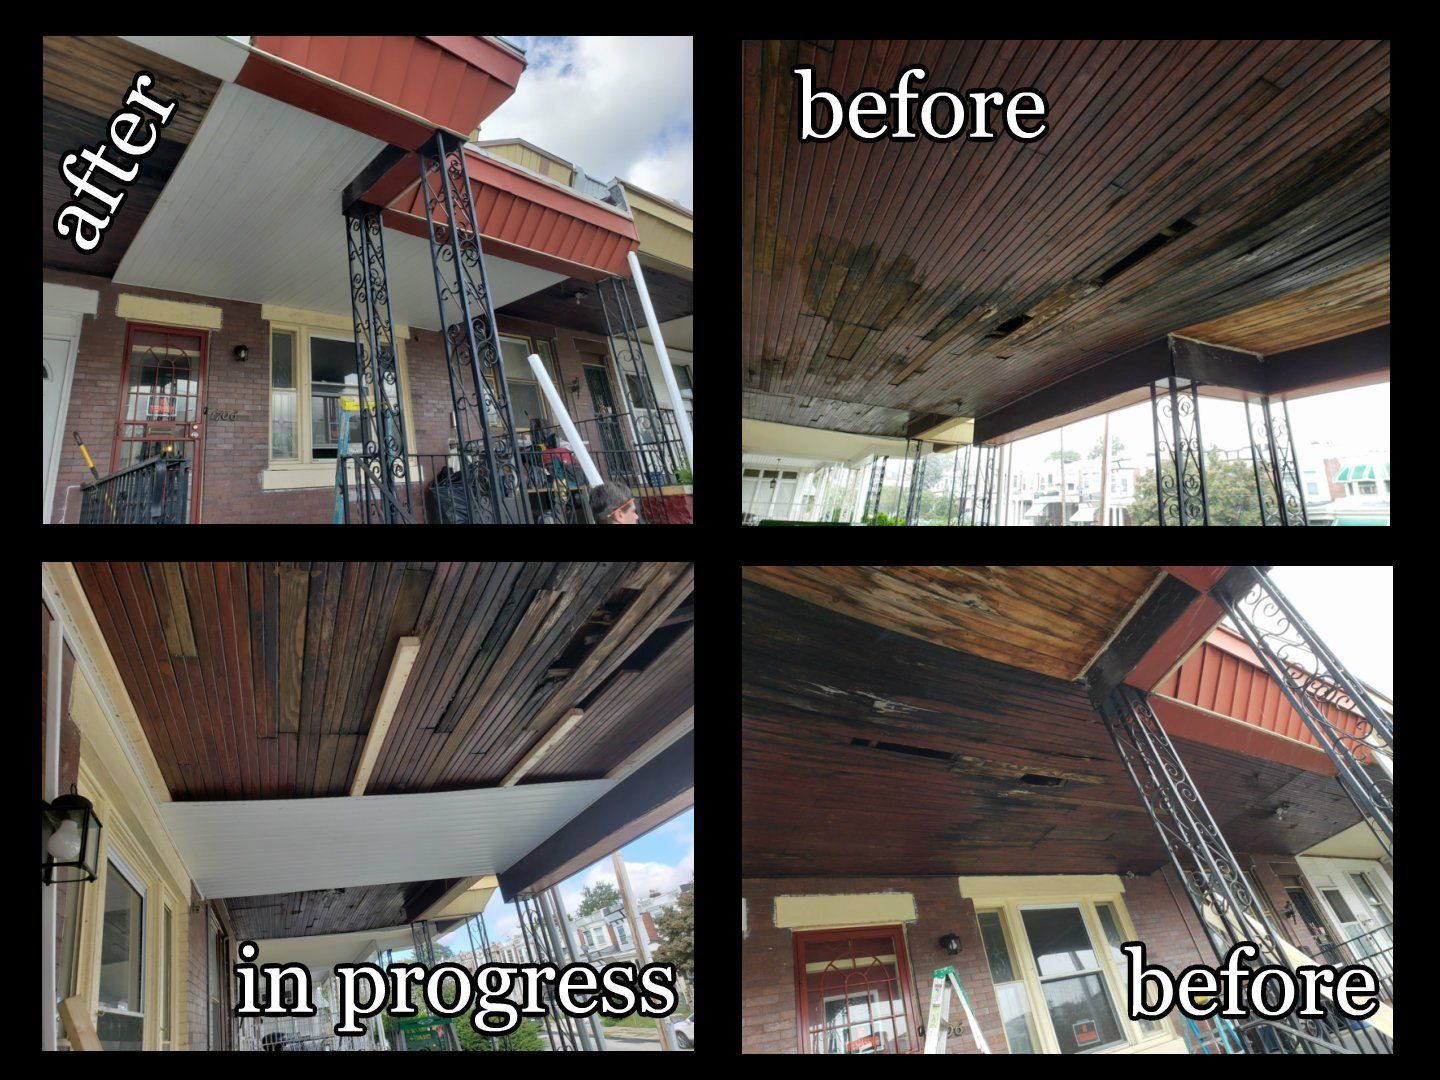 before/after collage repair porch ceiling with vinyl soffit in Philadelphia general contractor repair job